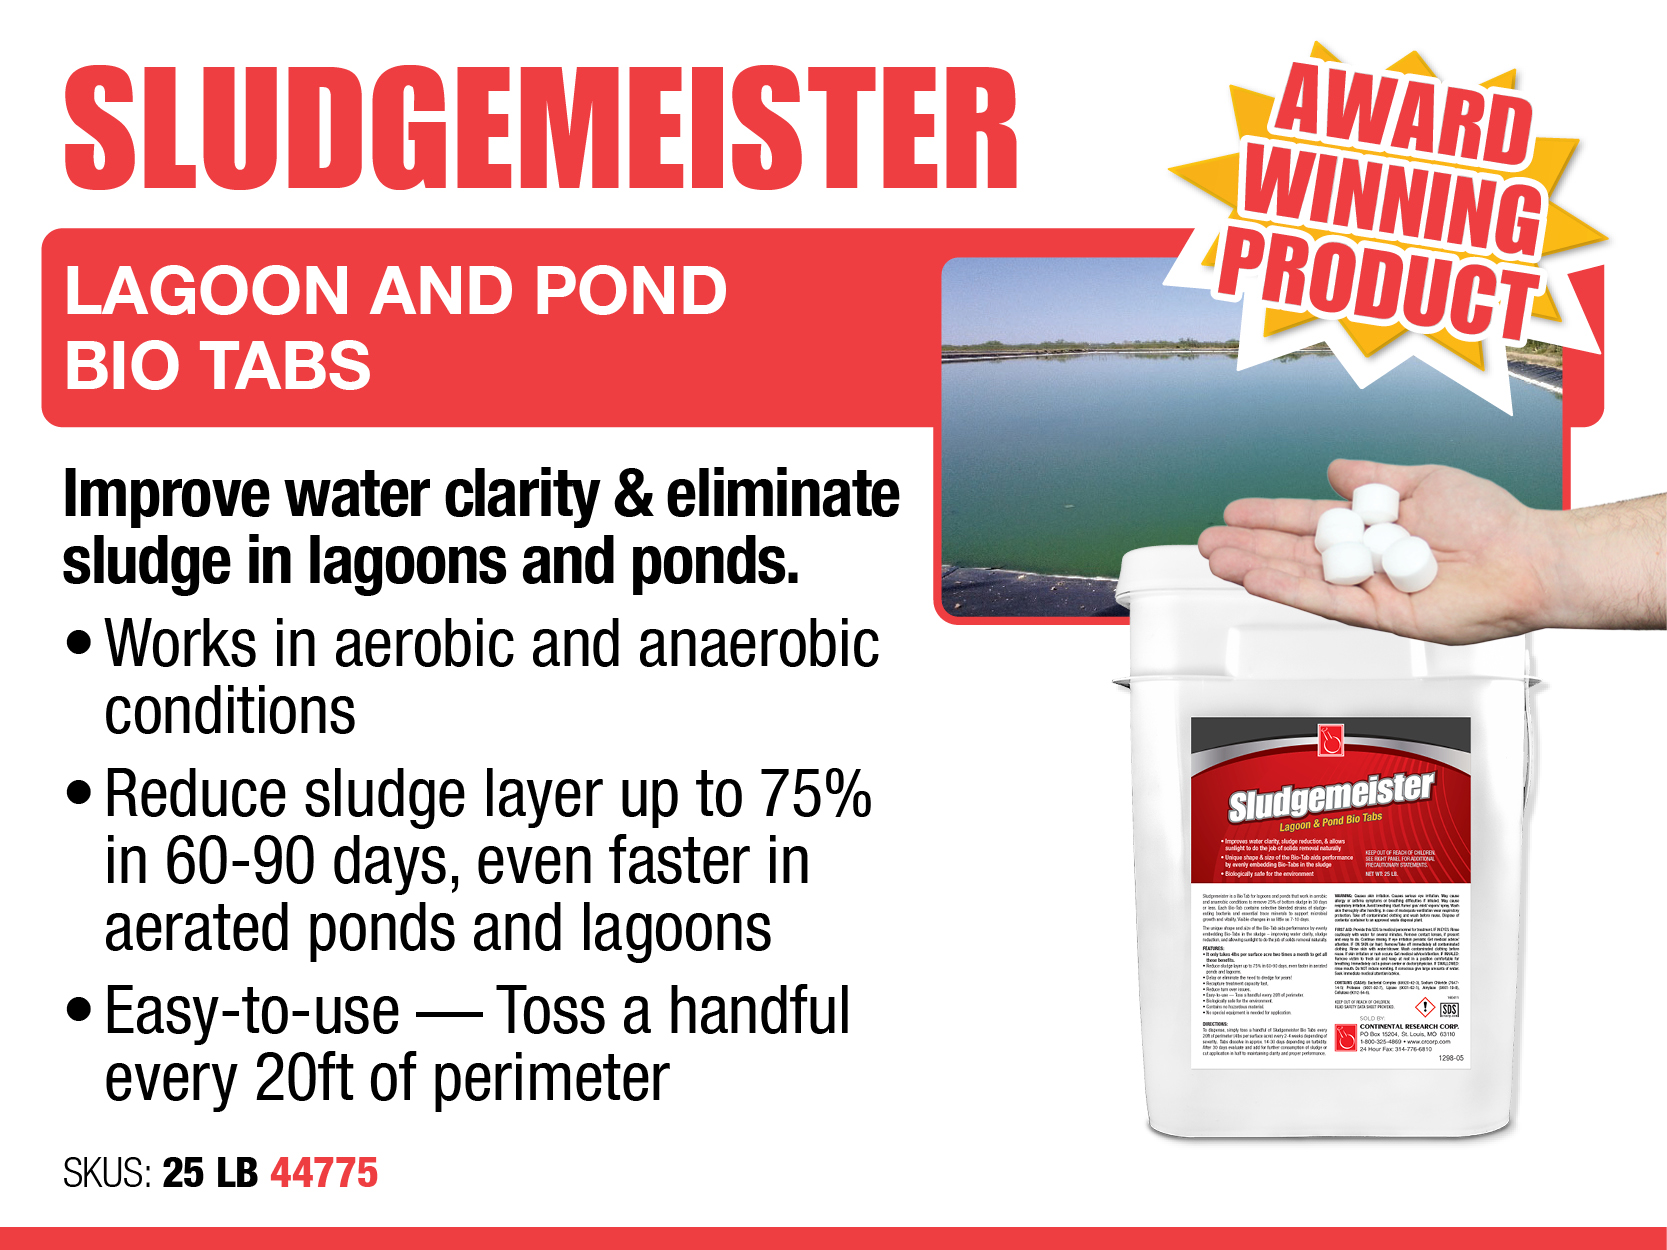 Sludgemeister - Lagoon and Pond Bio Tabs - Wastewater Essentials  - Collections, Plants, and Lagoons - Wastewater Treatment